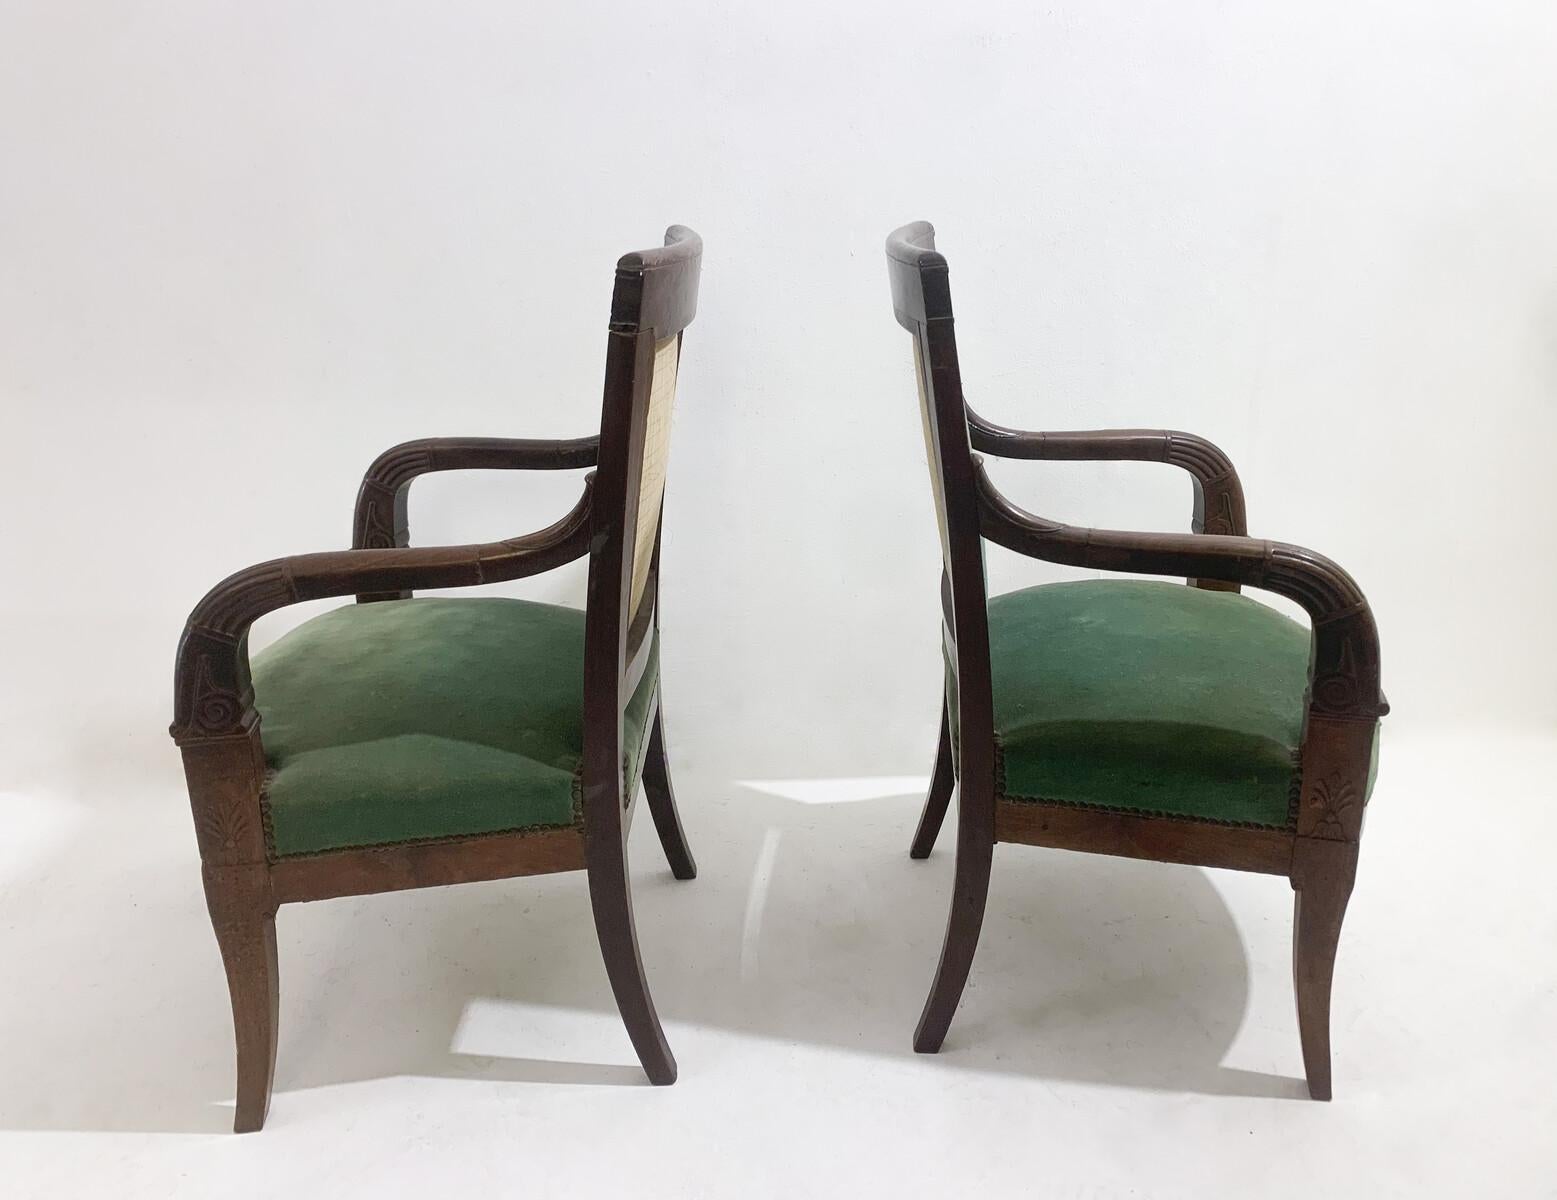 European Pair of Green Armchairs, Empire, Mahogany, 19th Century For Sale